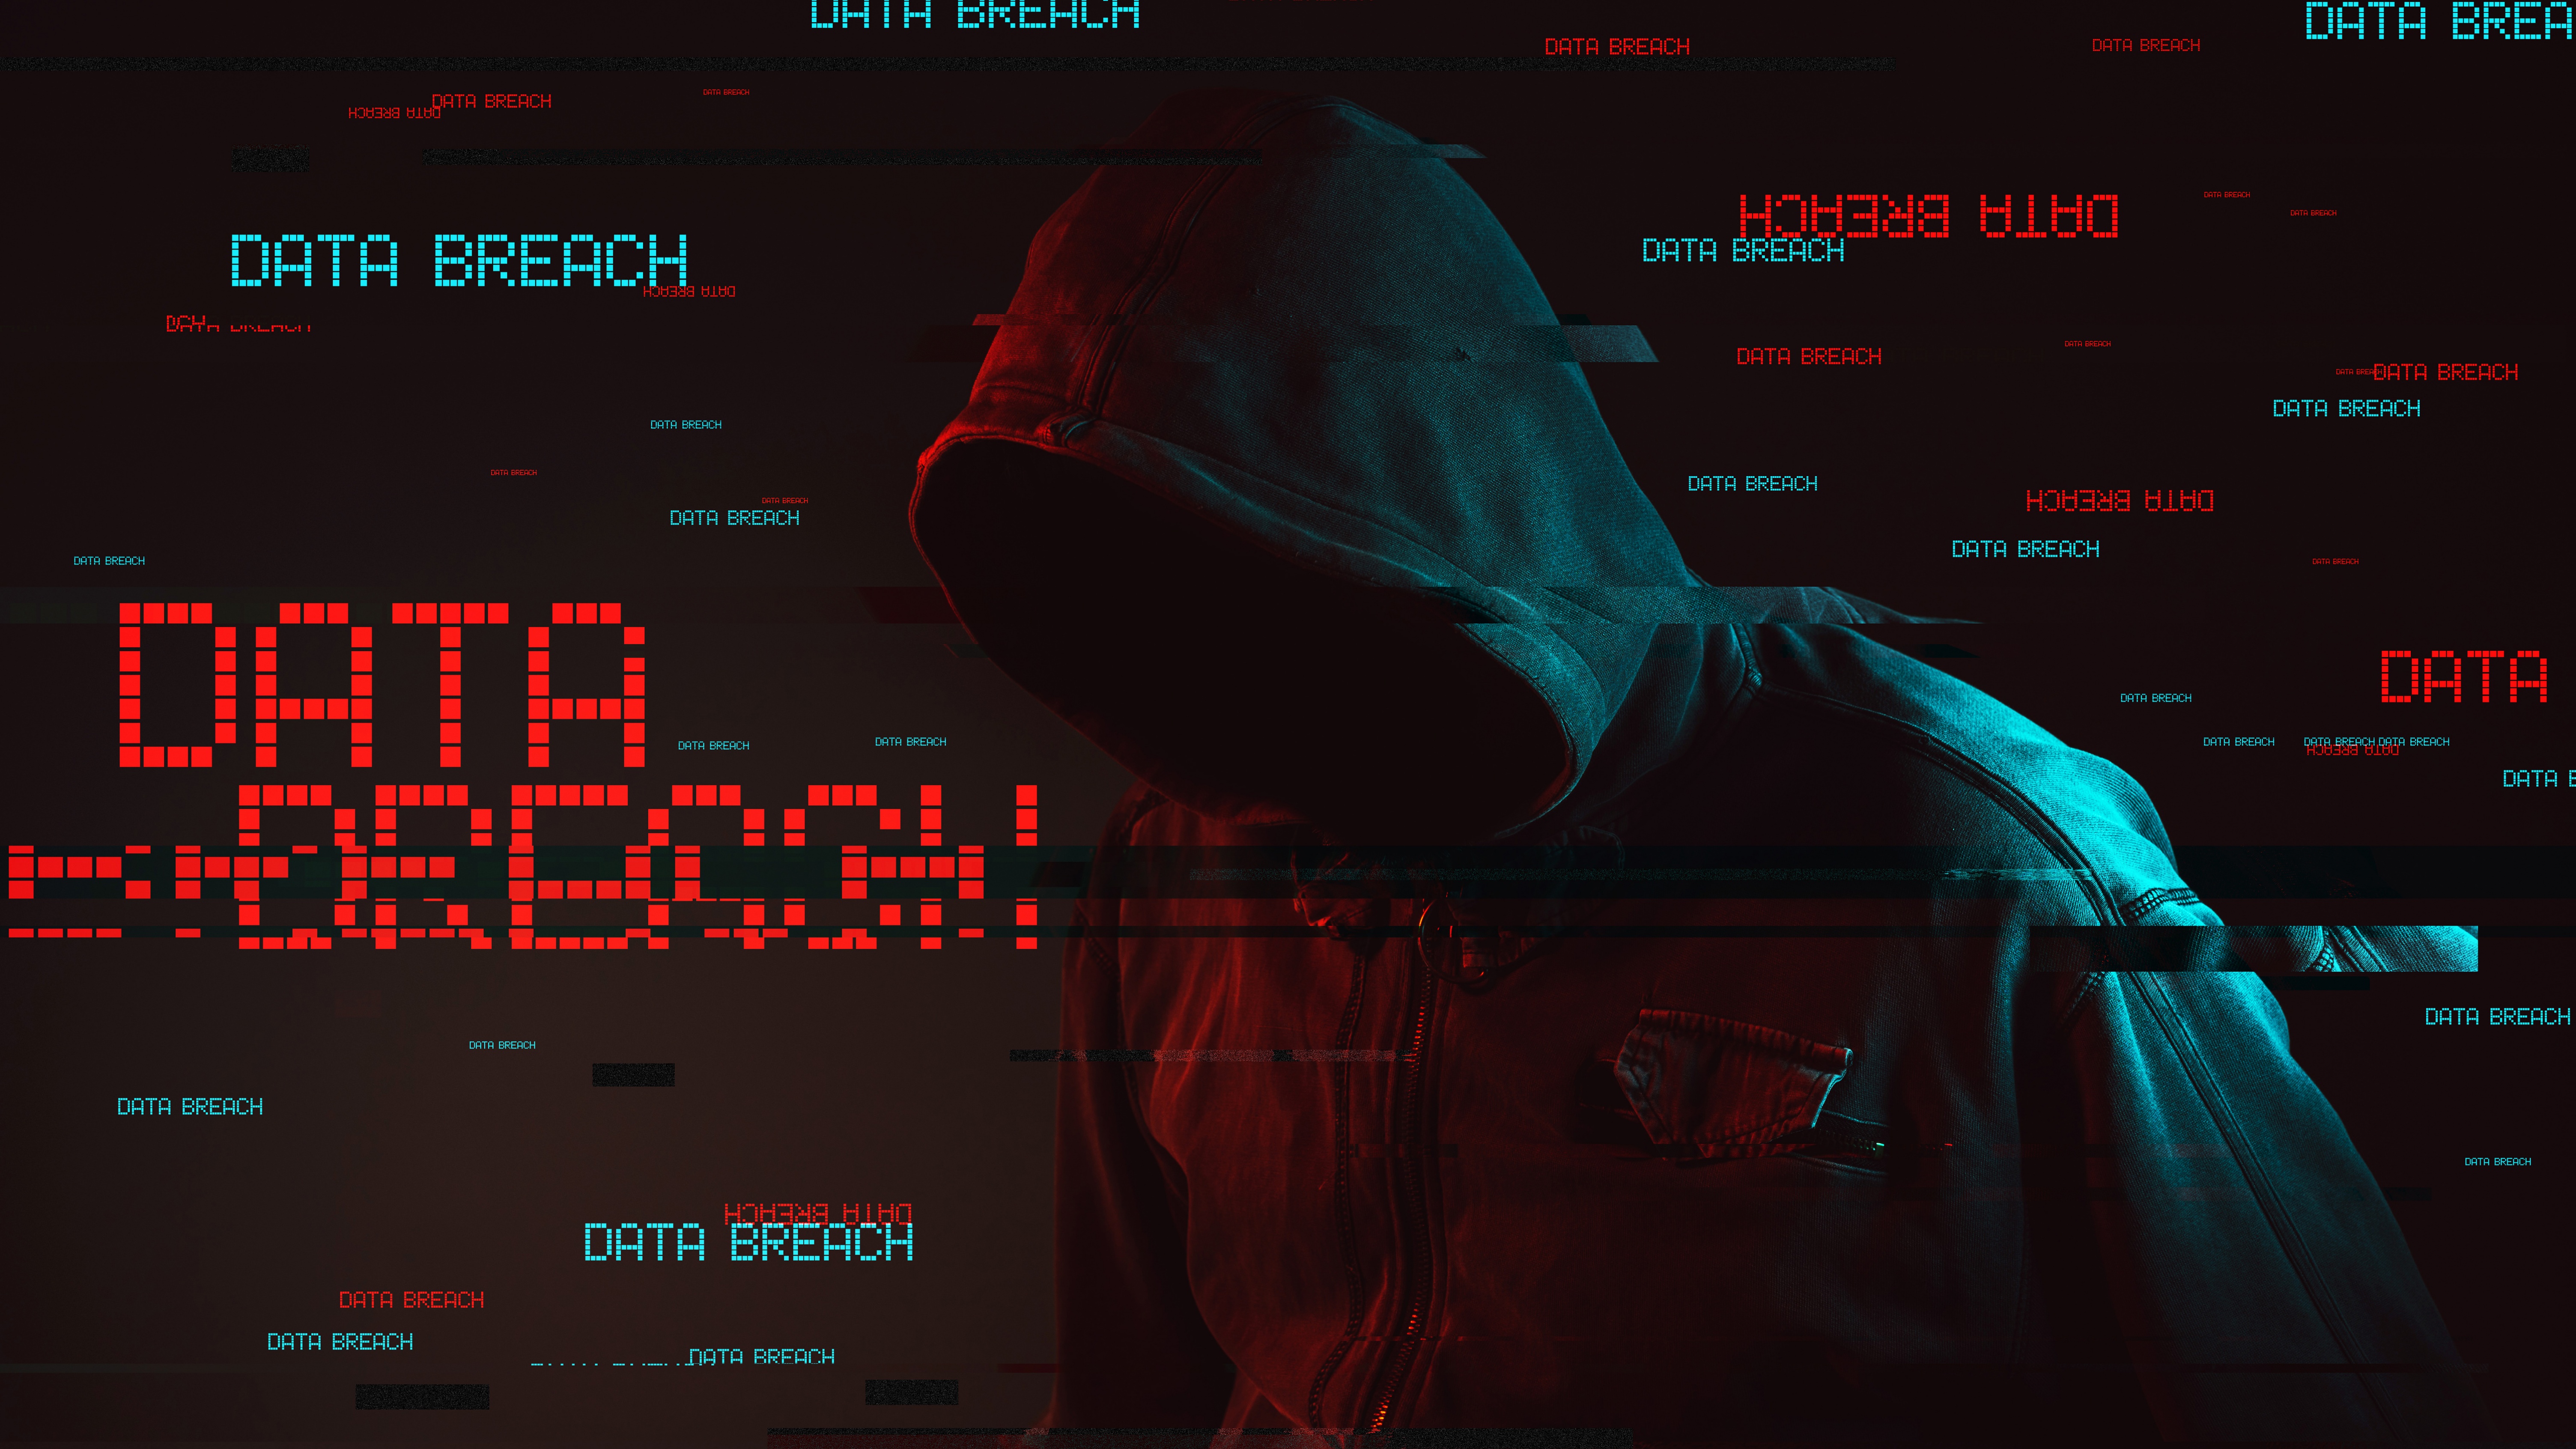 ethical hackers wallpaper